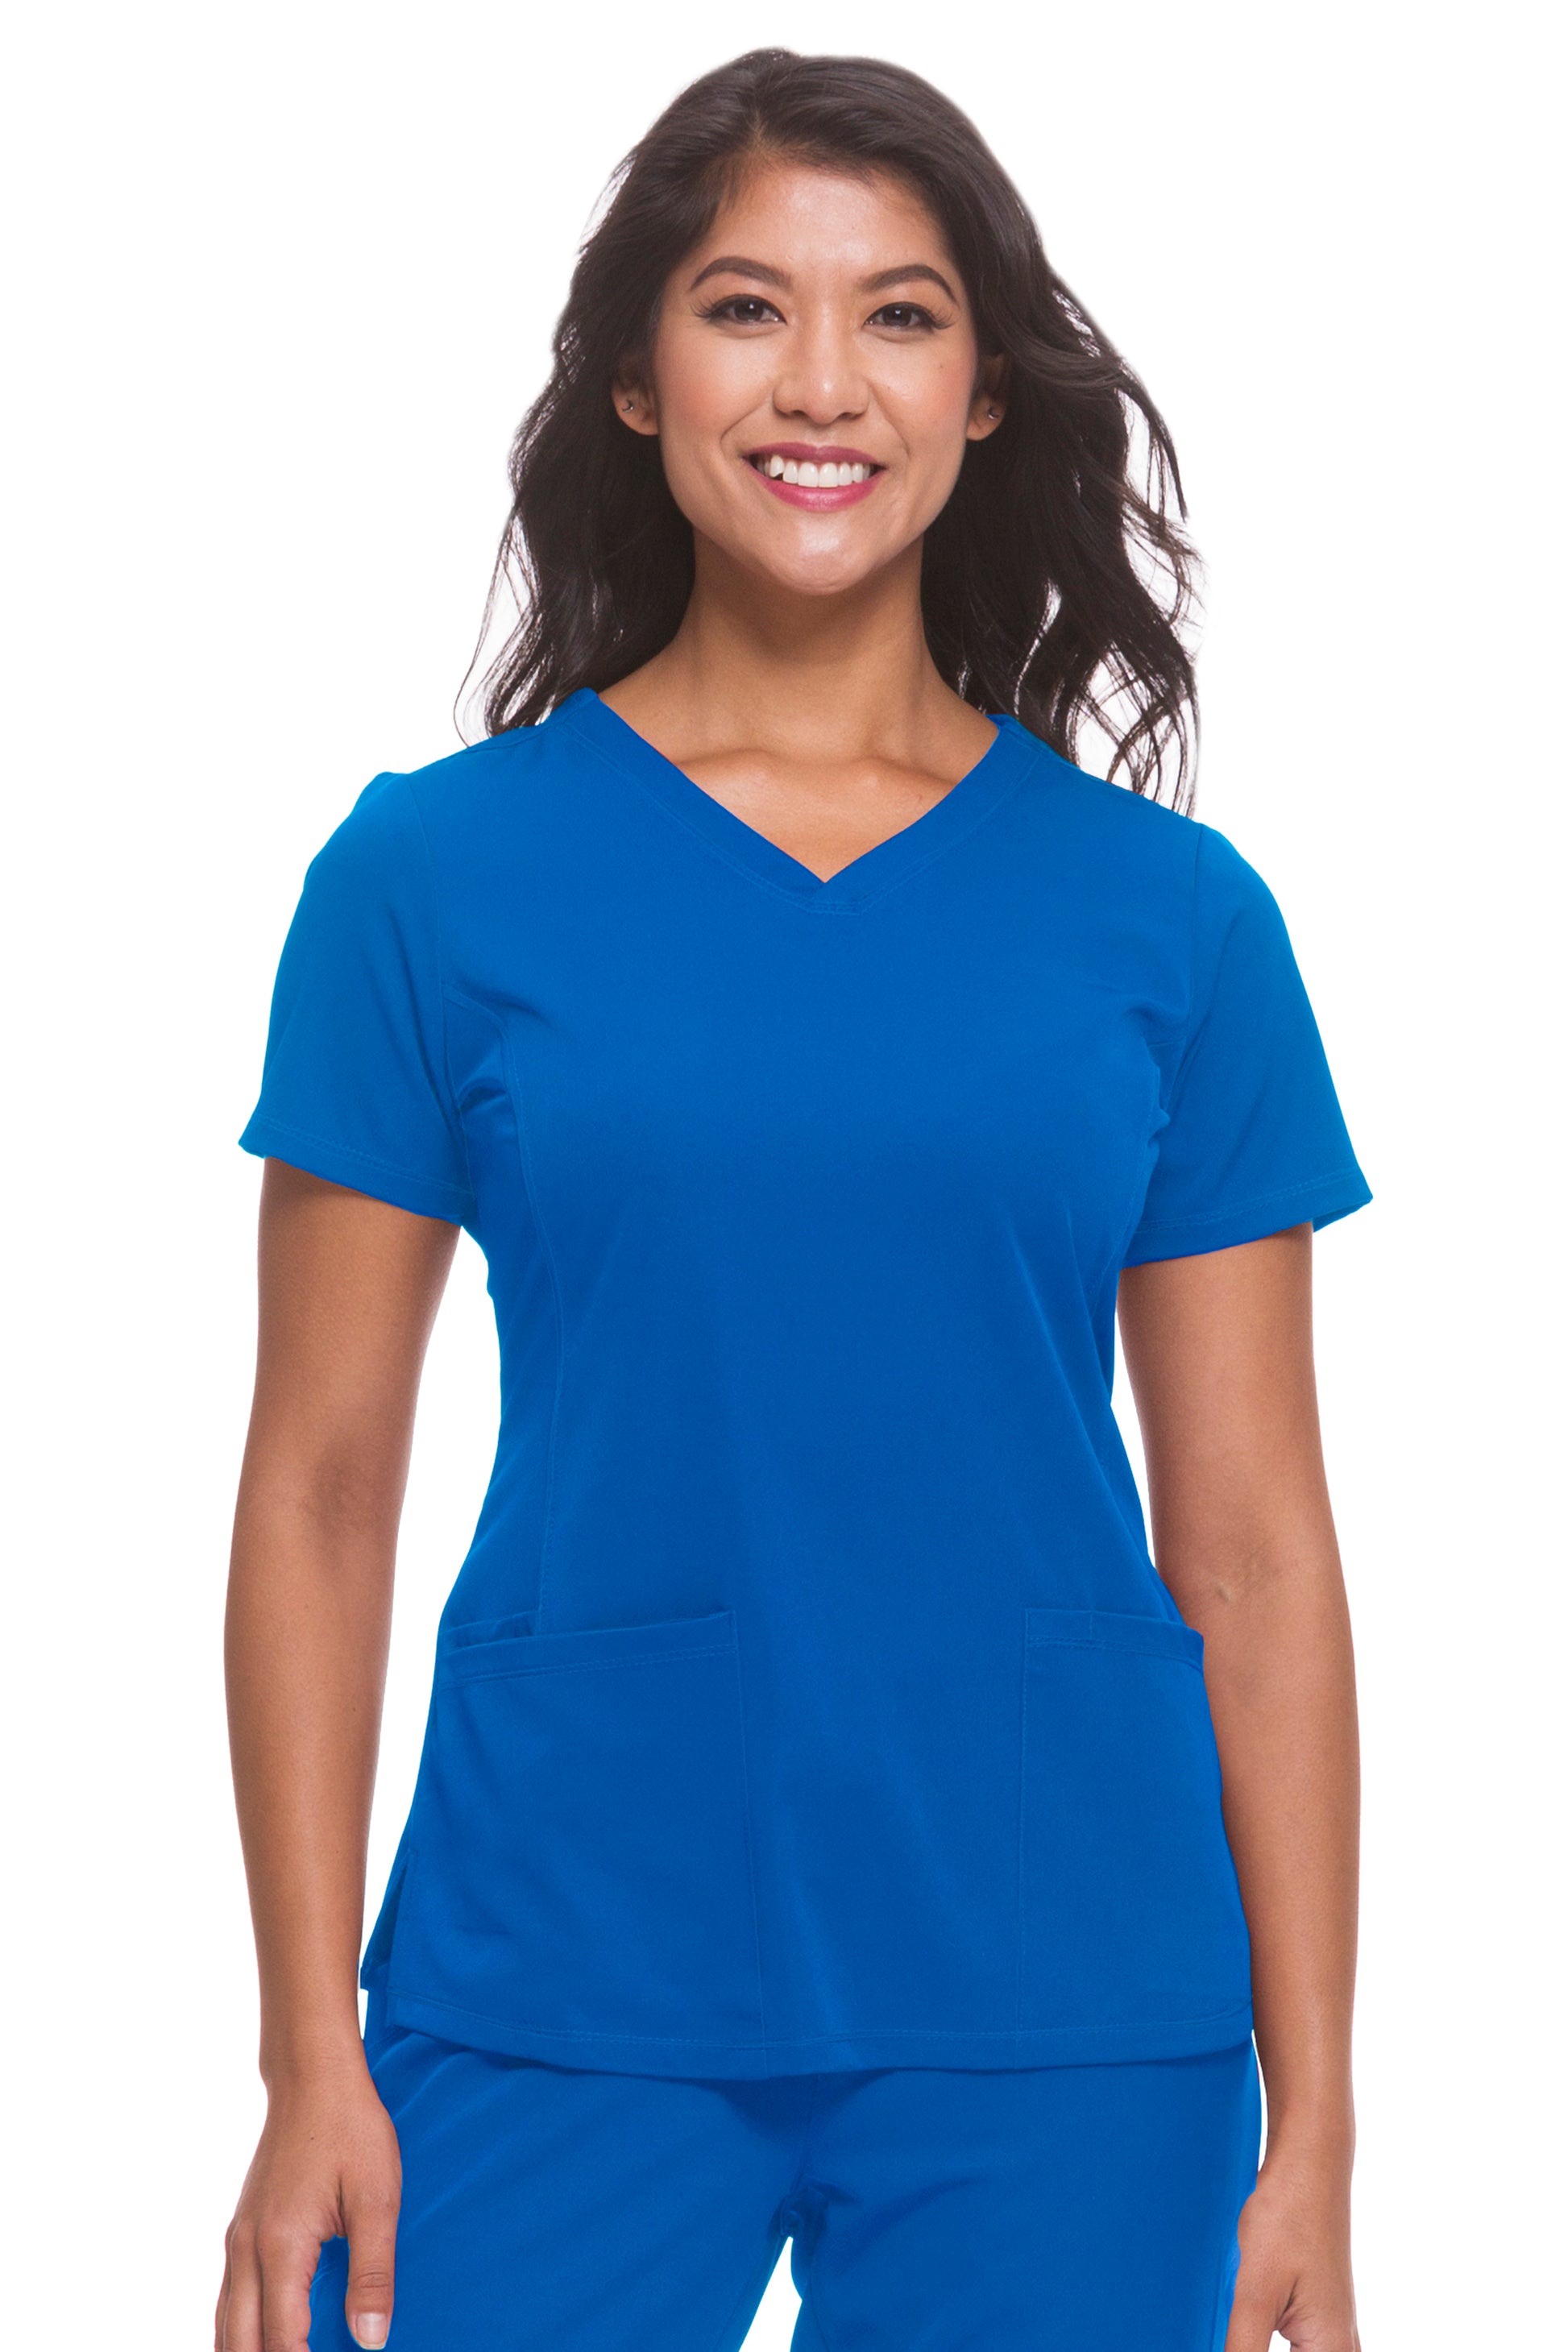 Shop for HH CUP, Blue, Womens